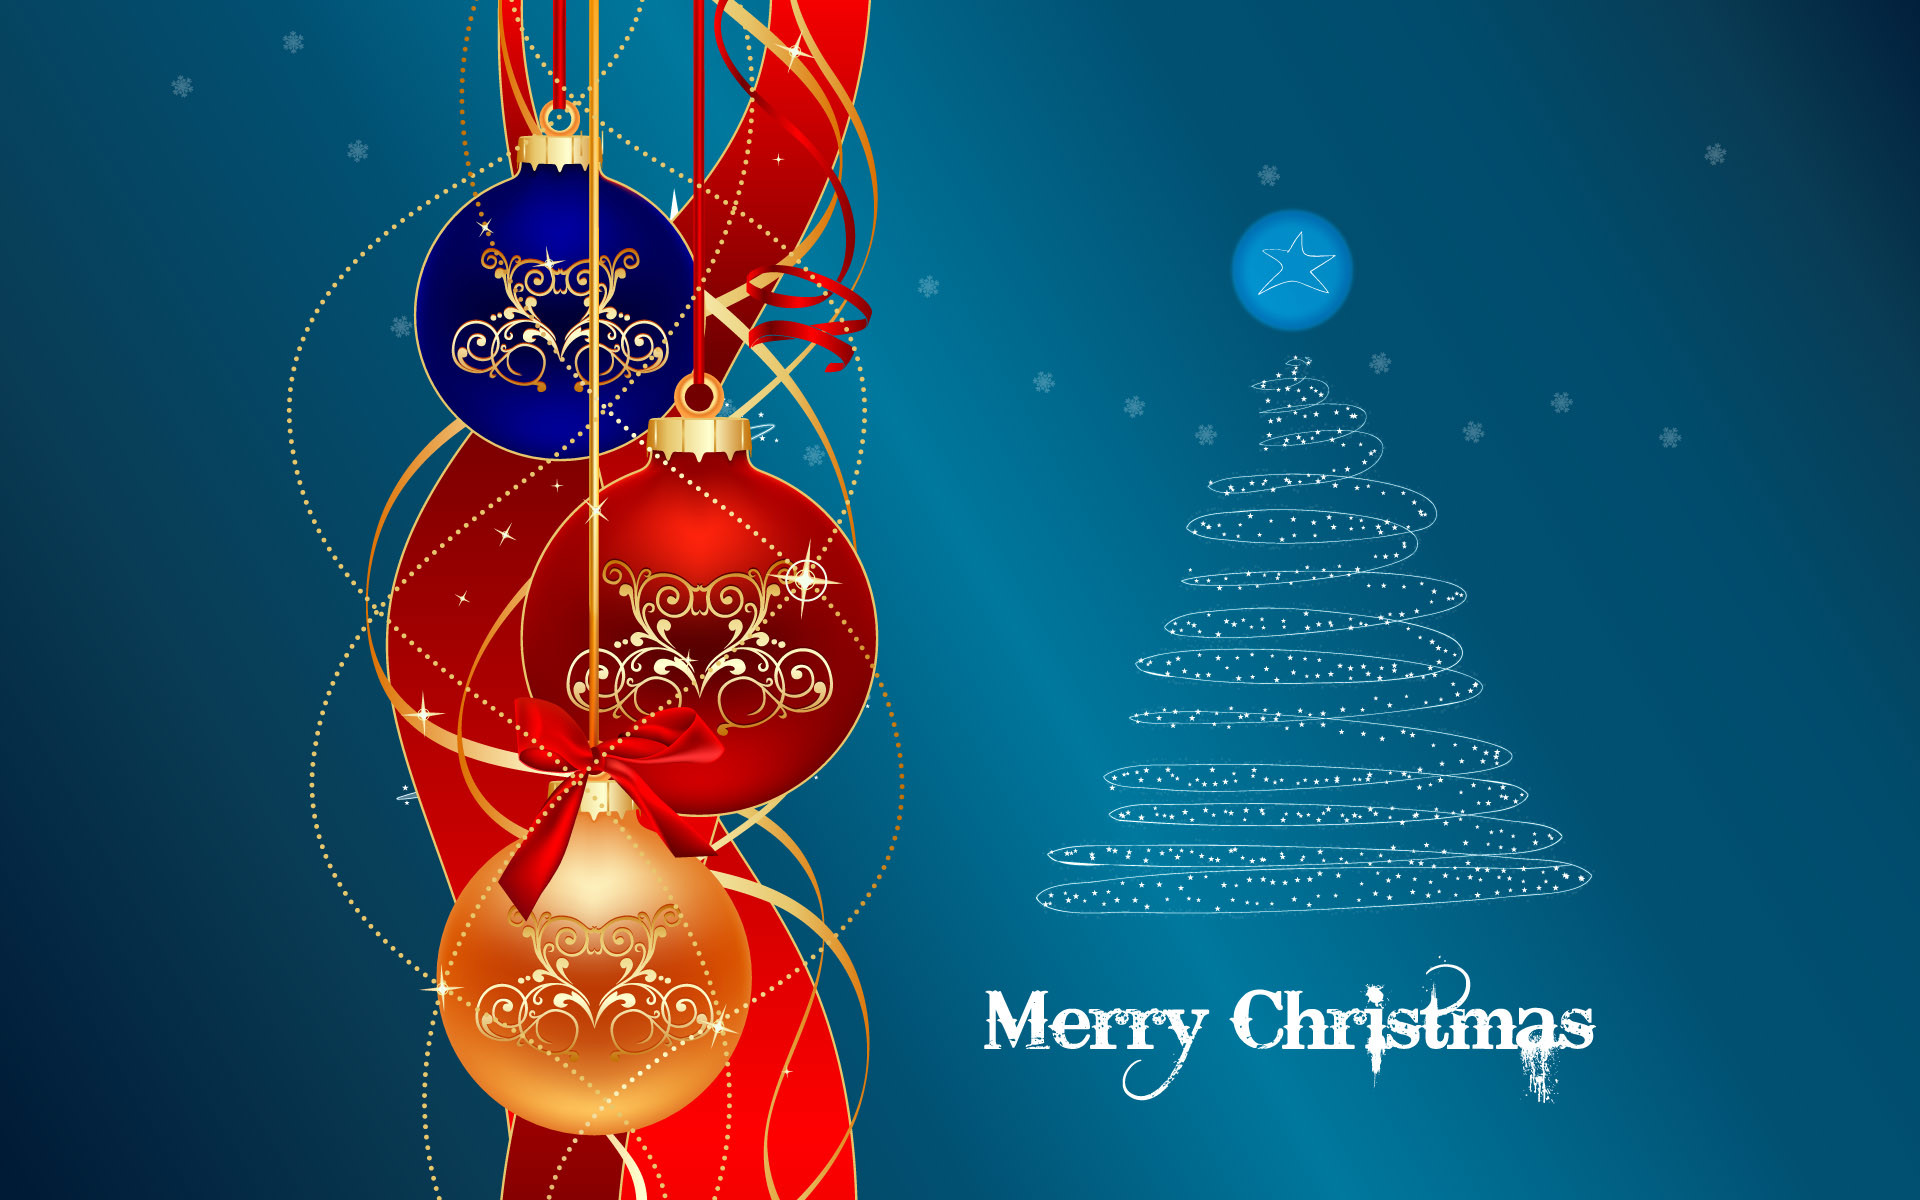 1920x1200 20 Merry Christmas Images & Wallpapers